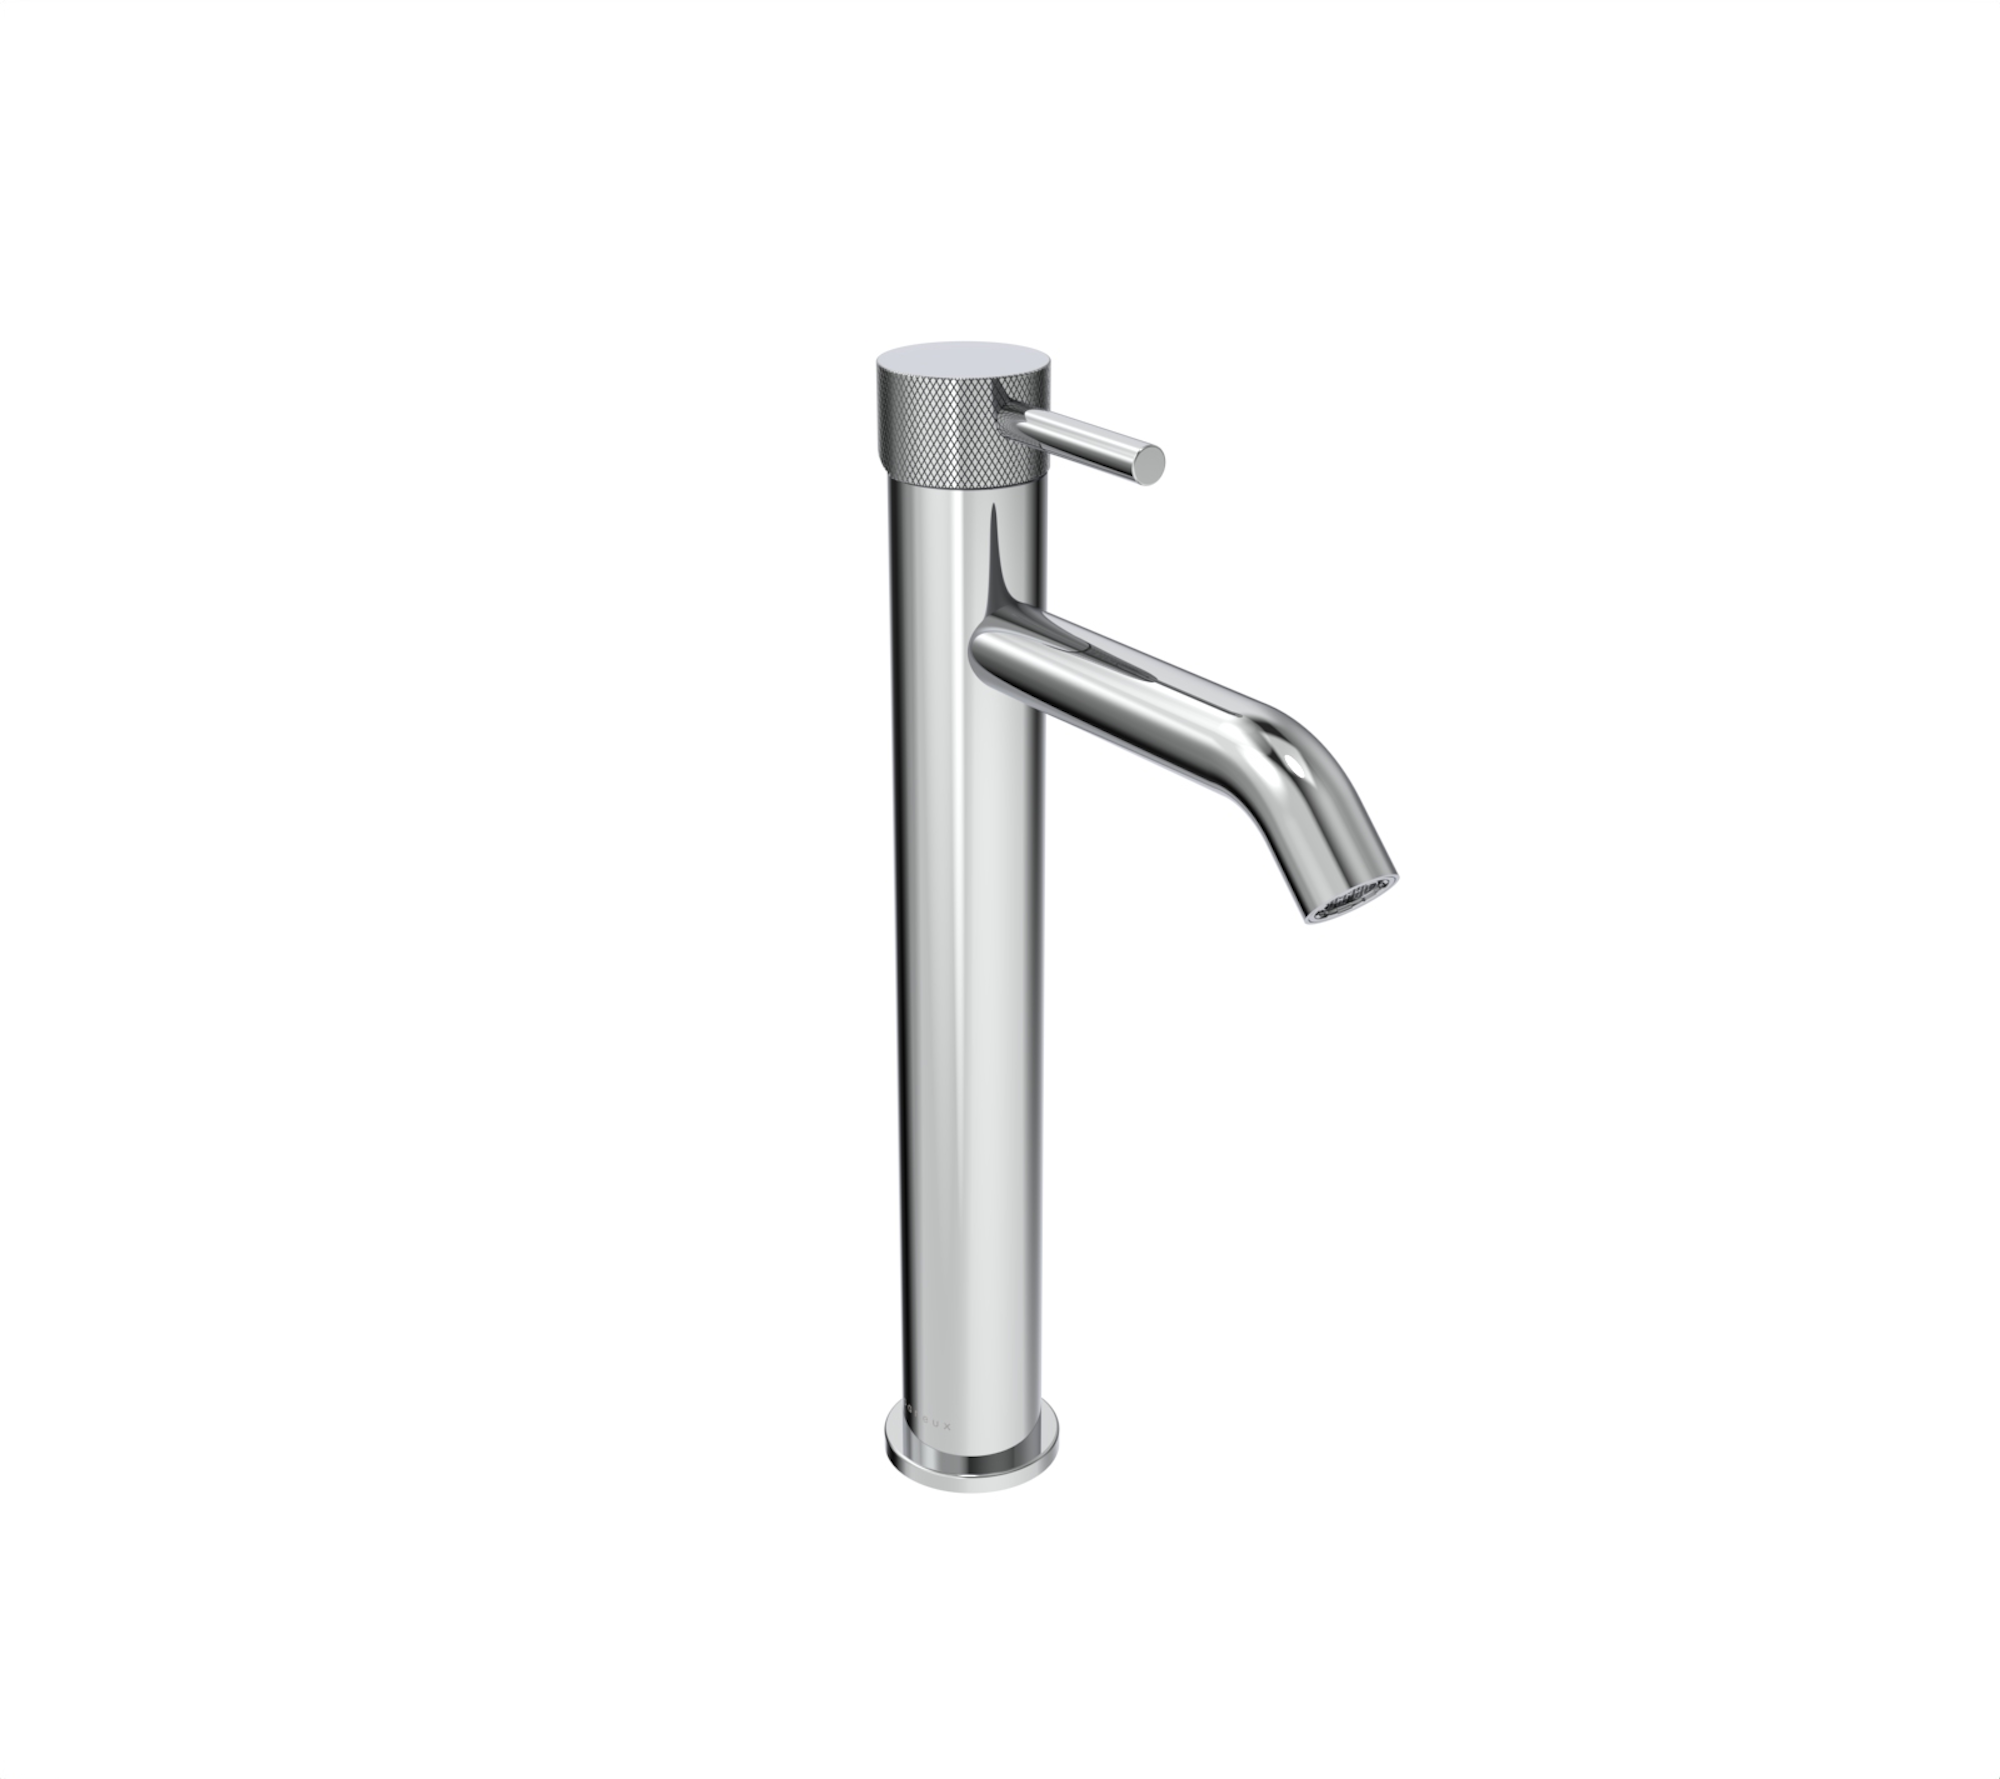 COS tall basin mixer with knurled handle - Chrome